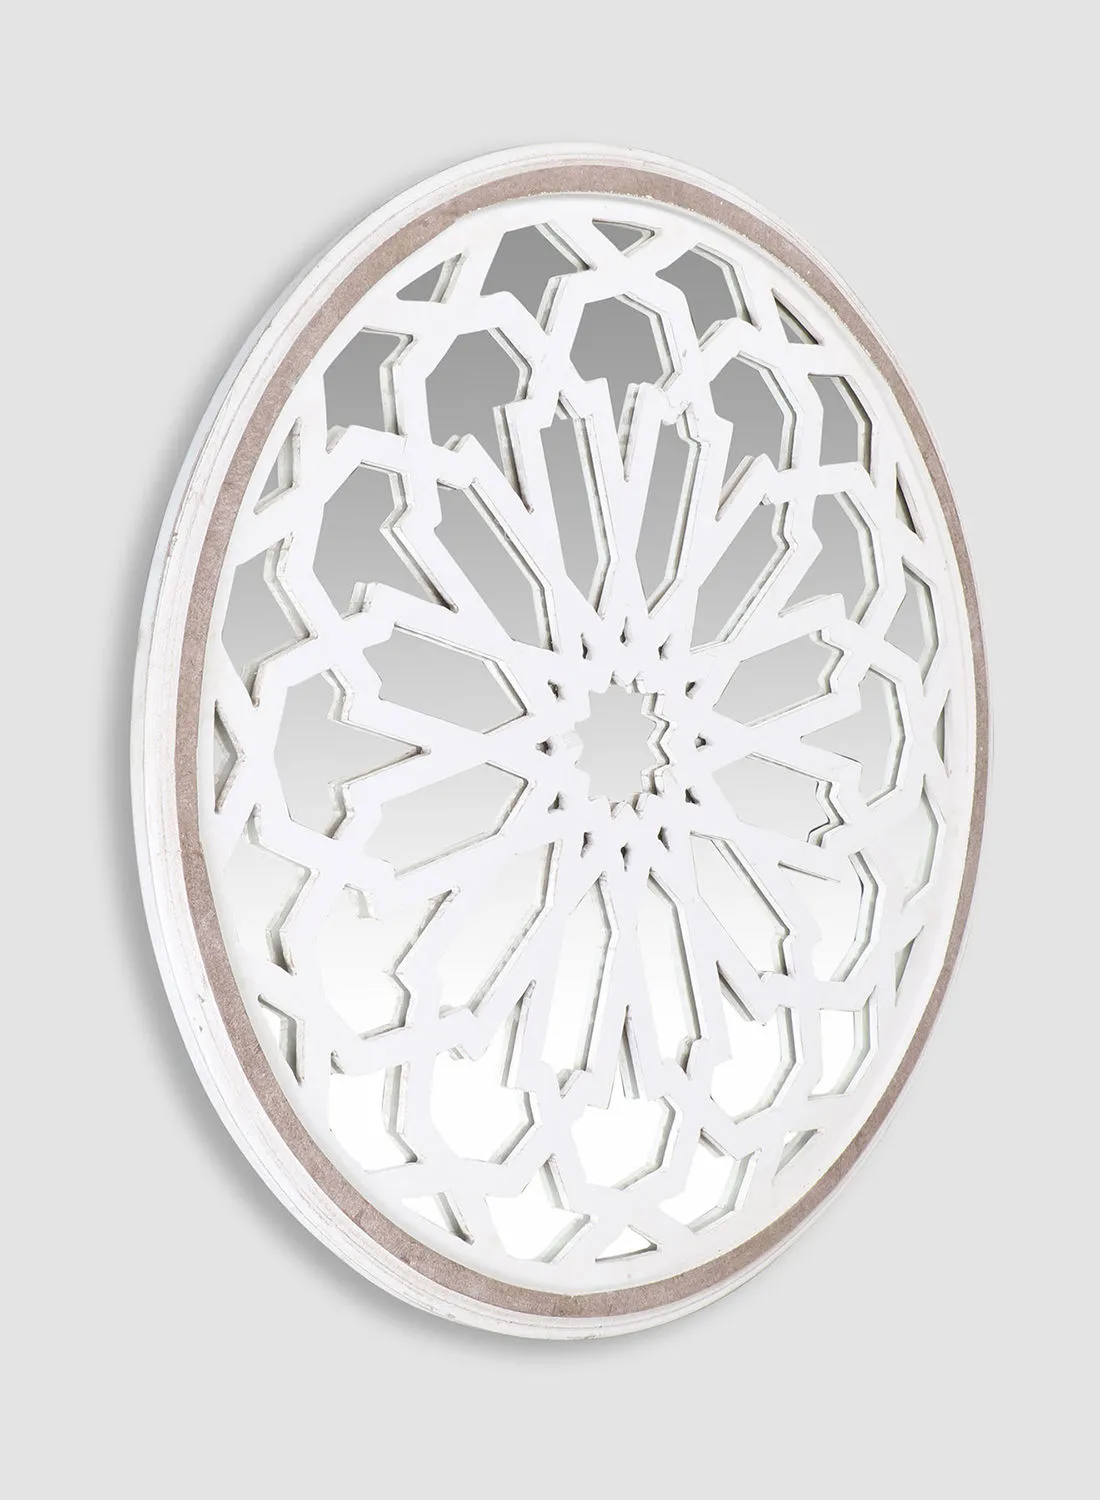 Switch Decorative Mirror Unique Luxury Quality Material For The Perfect Stylish Home  AHI-022321210 White Dia83centimeter